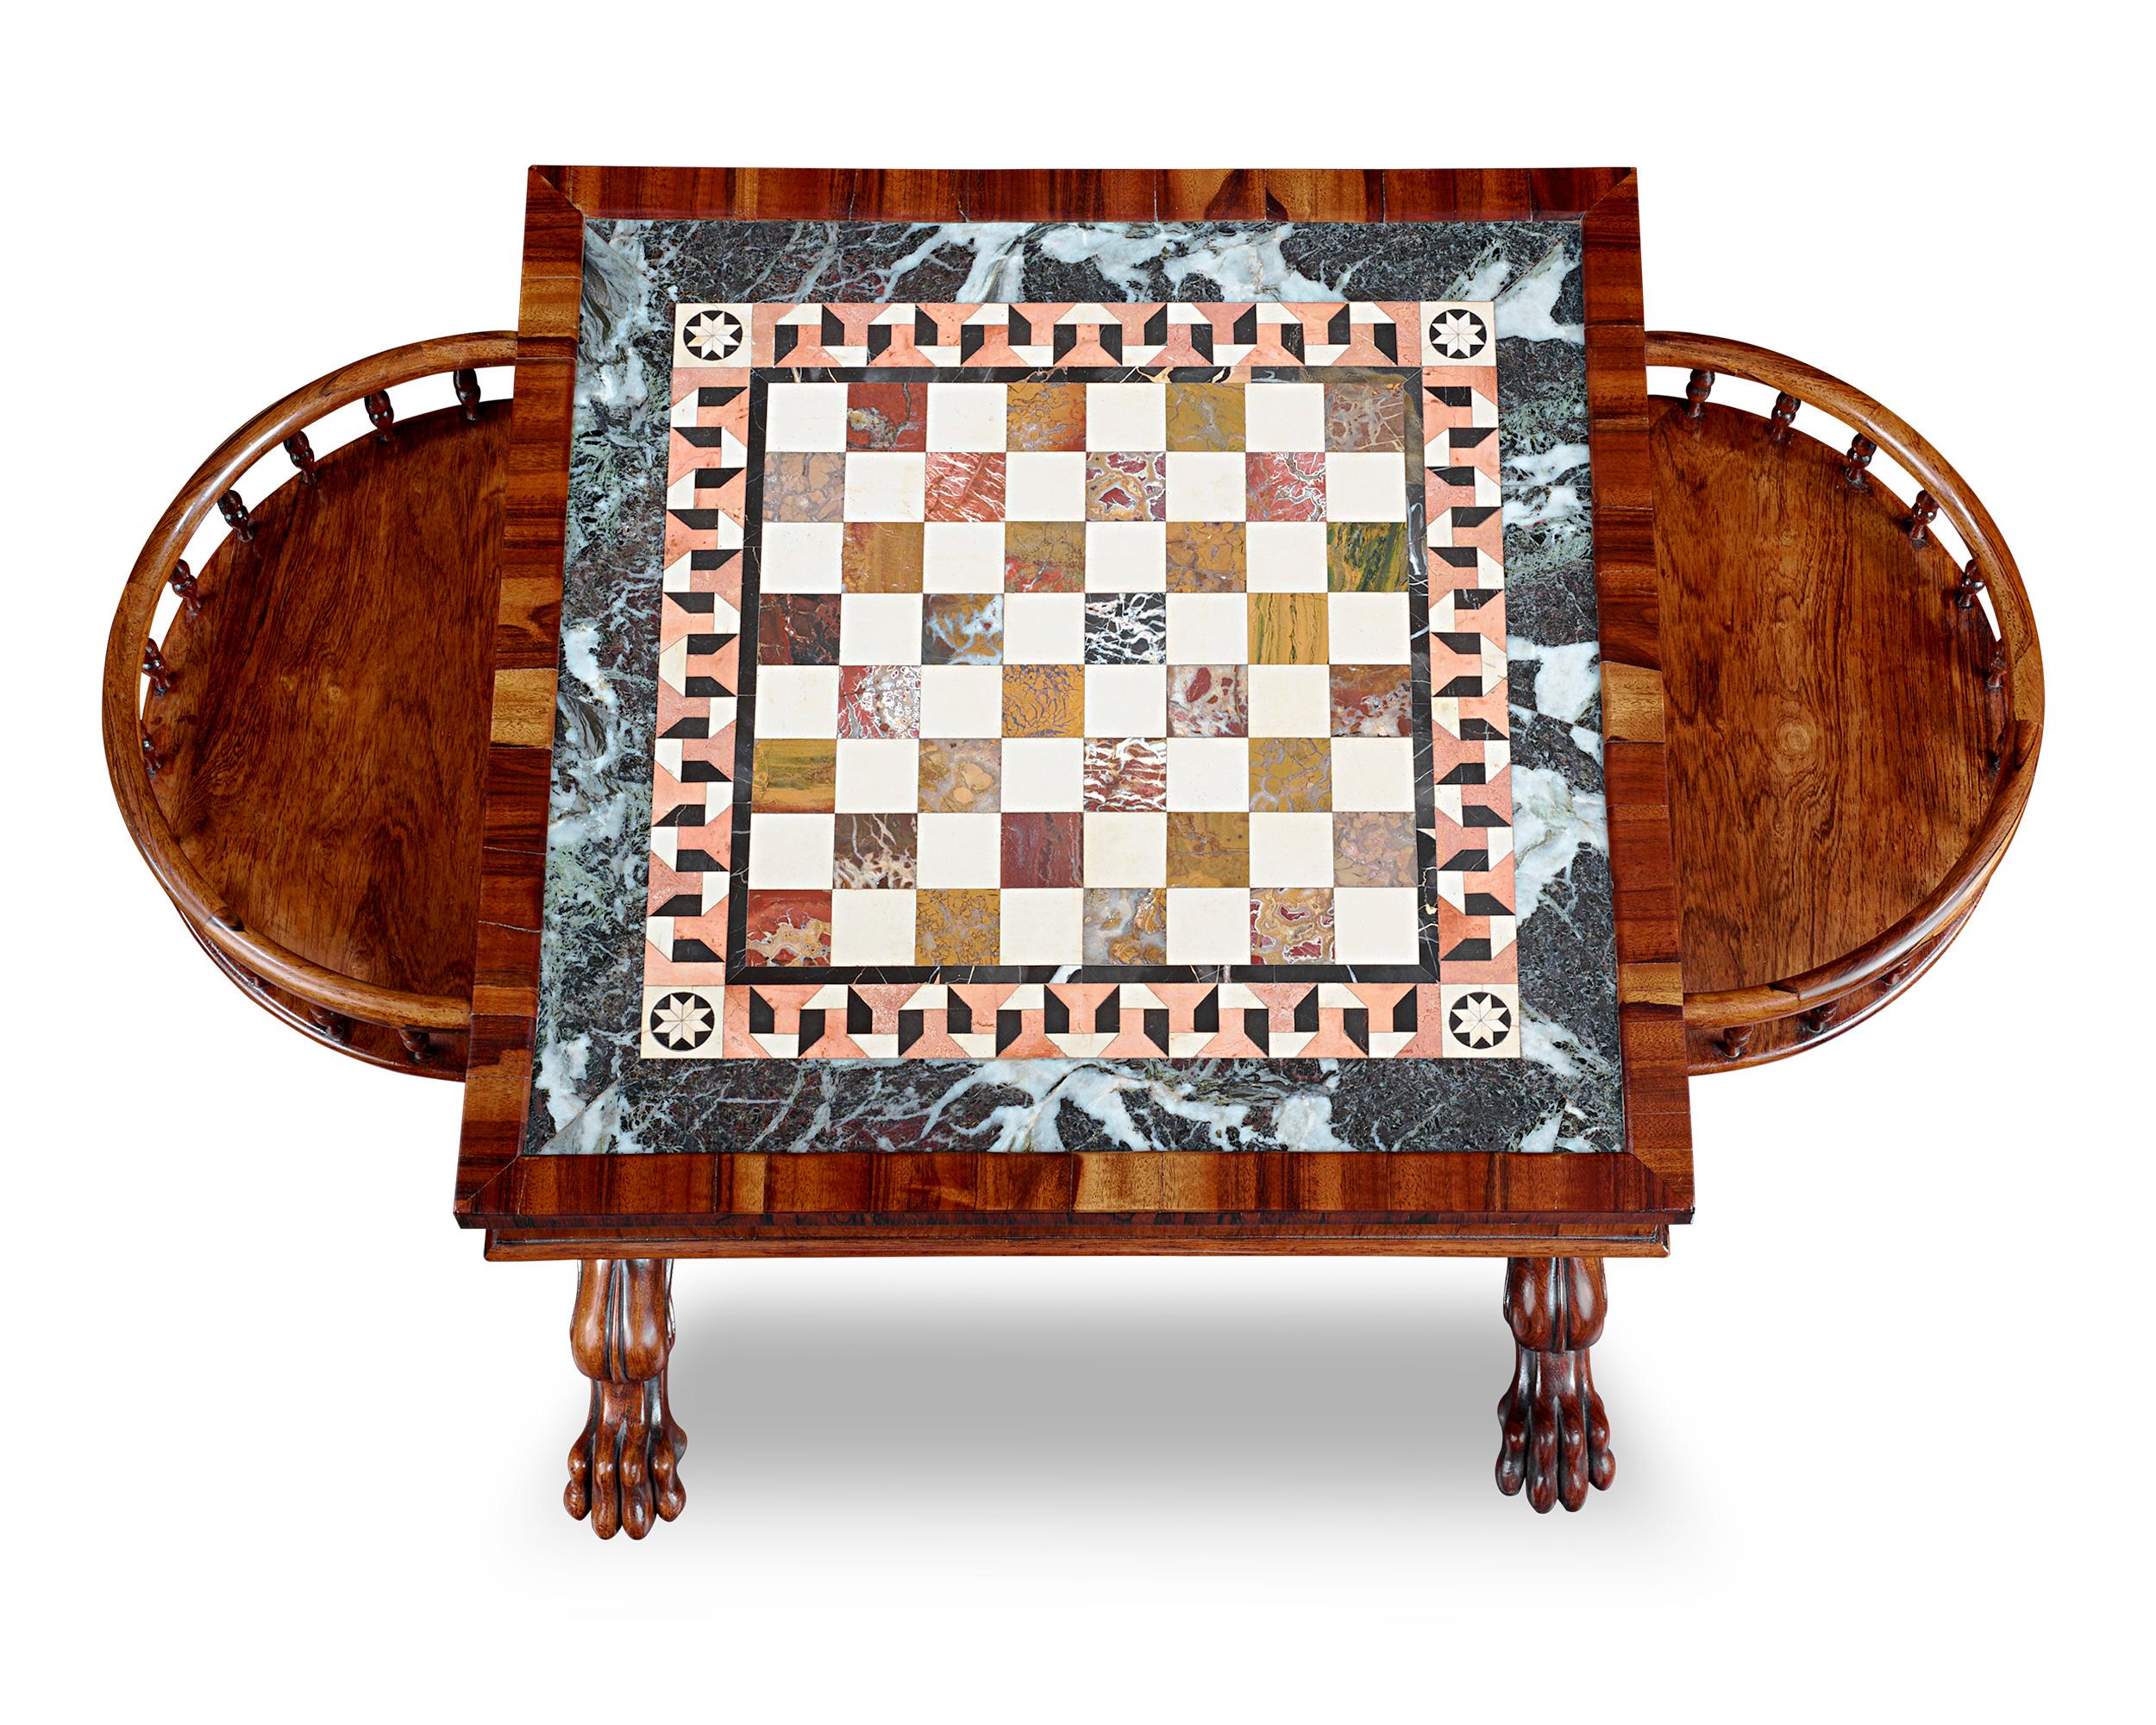 A luxurious array of rare marbles and hard stones are inset into the playing surface of this William IV-period chess table. The visually appealing arrangement incorporates specimens with a variety of unique patterns and colors, including marbles